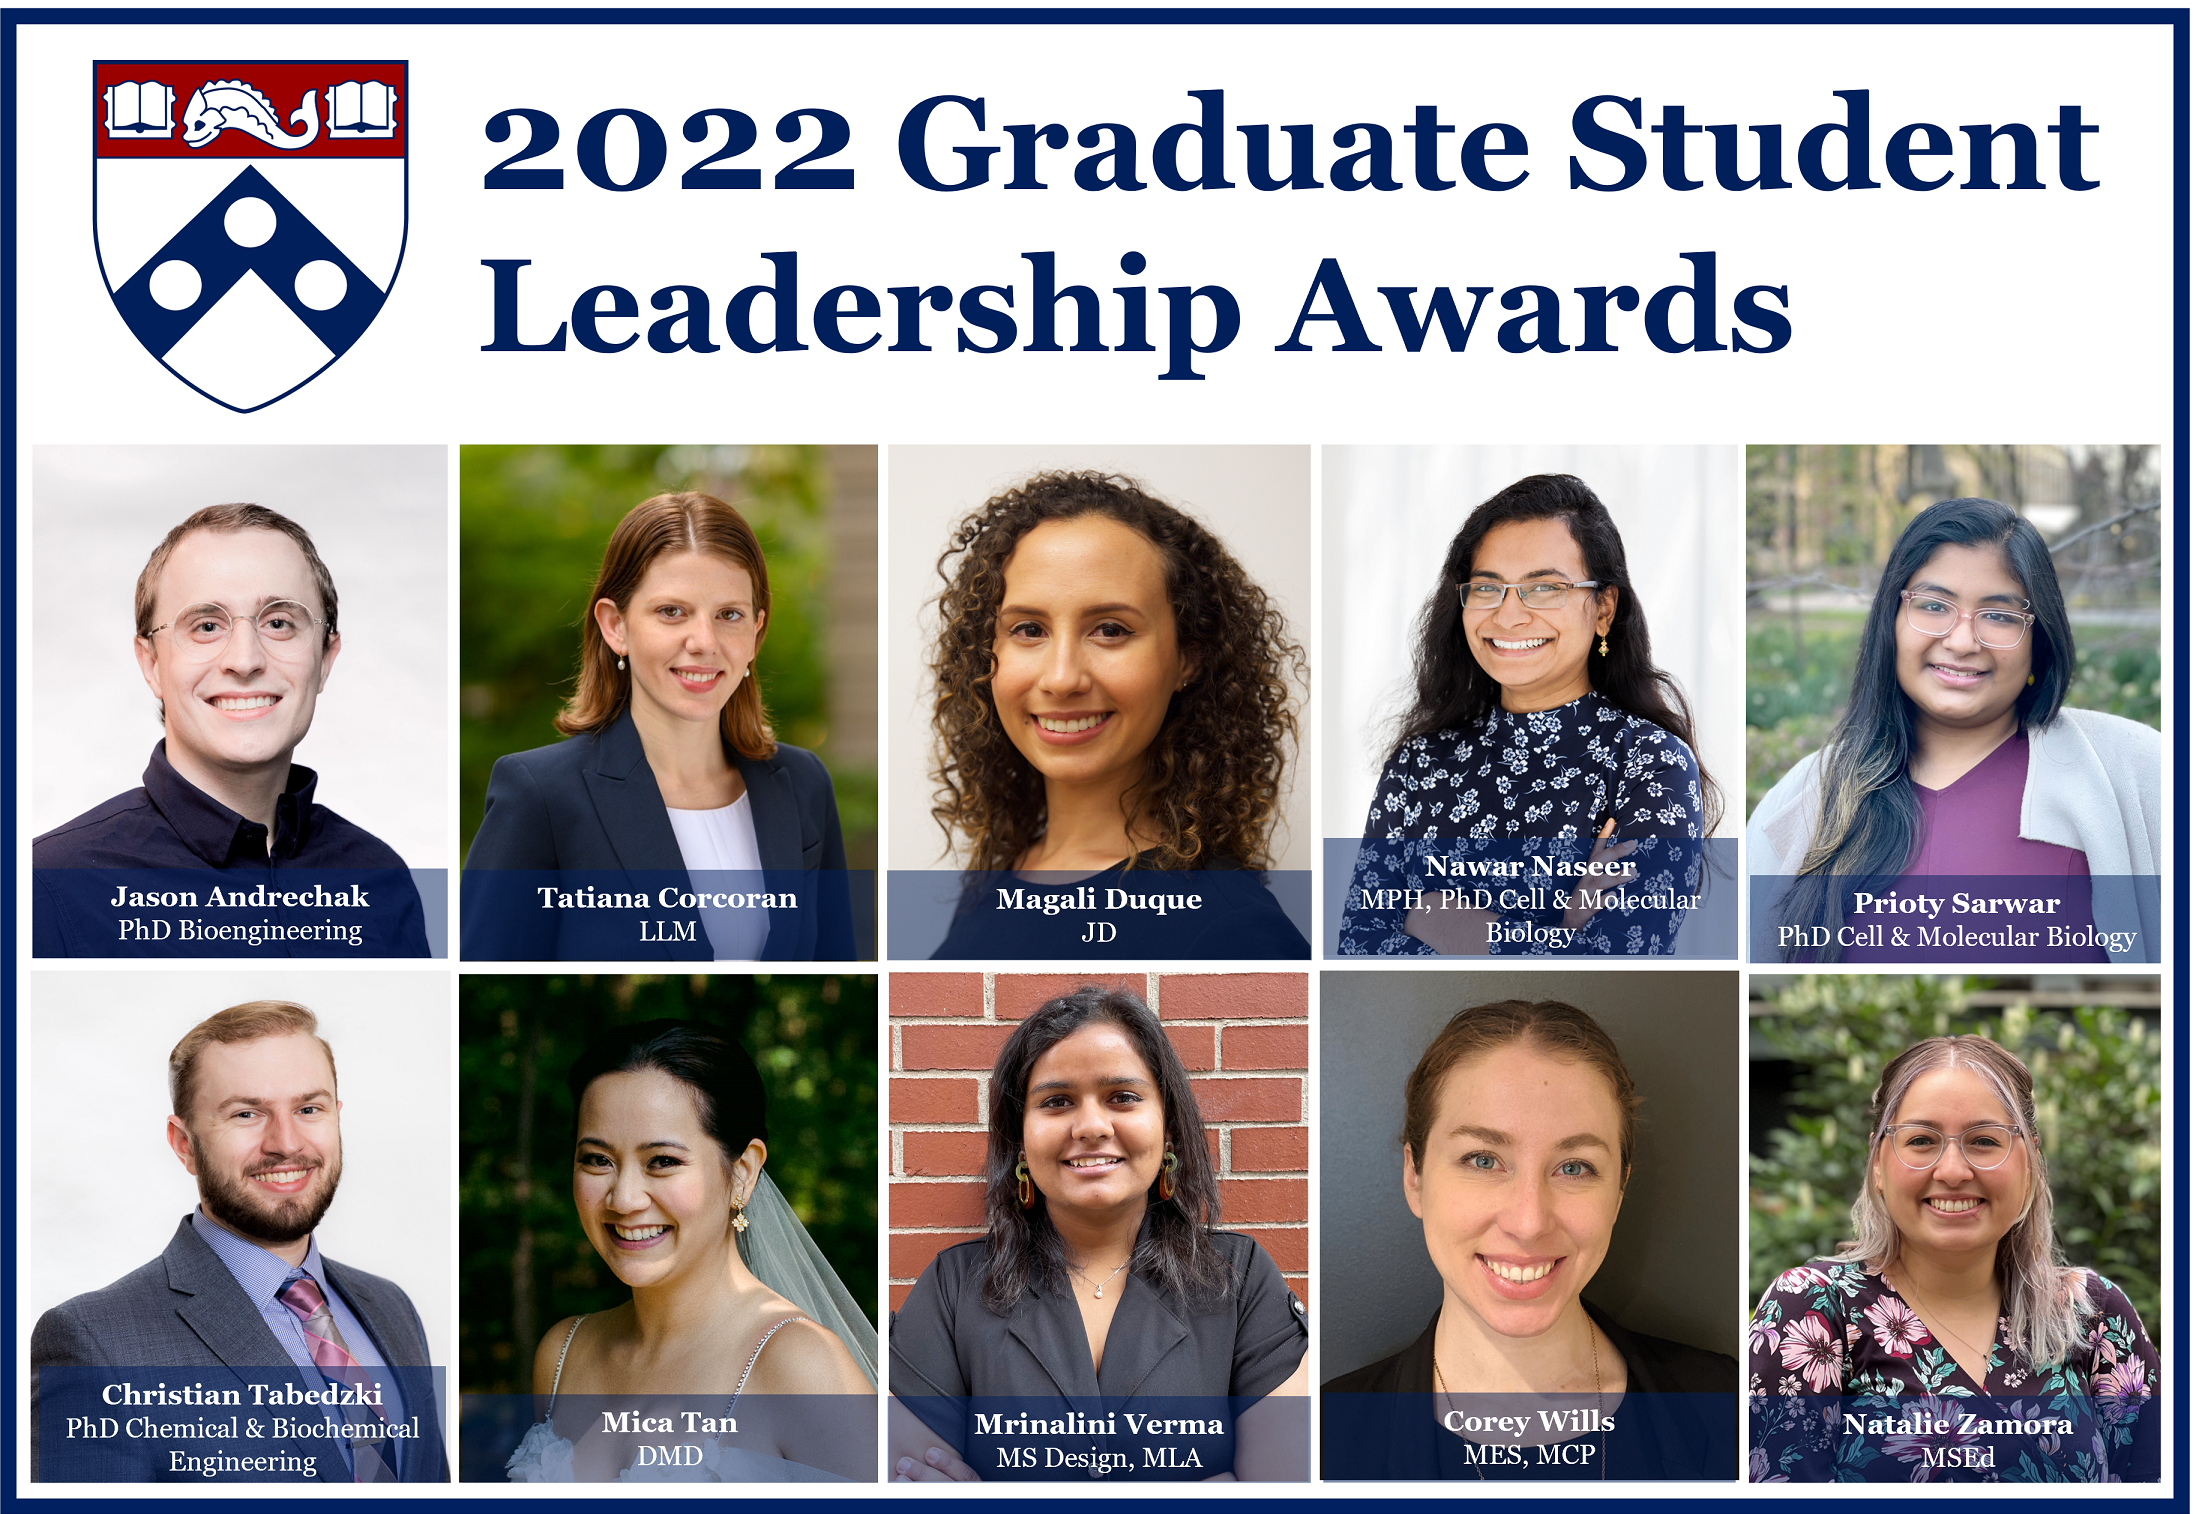 Photo collage of recipient headshots with Penn shield and text: "2022 Graduate Student Leadership Awards"